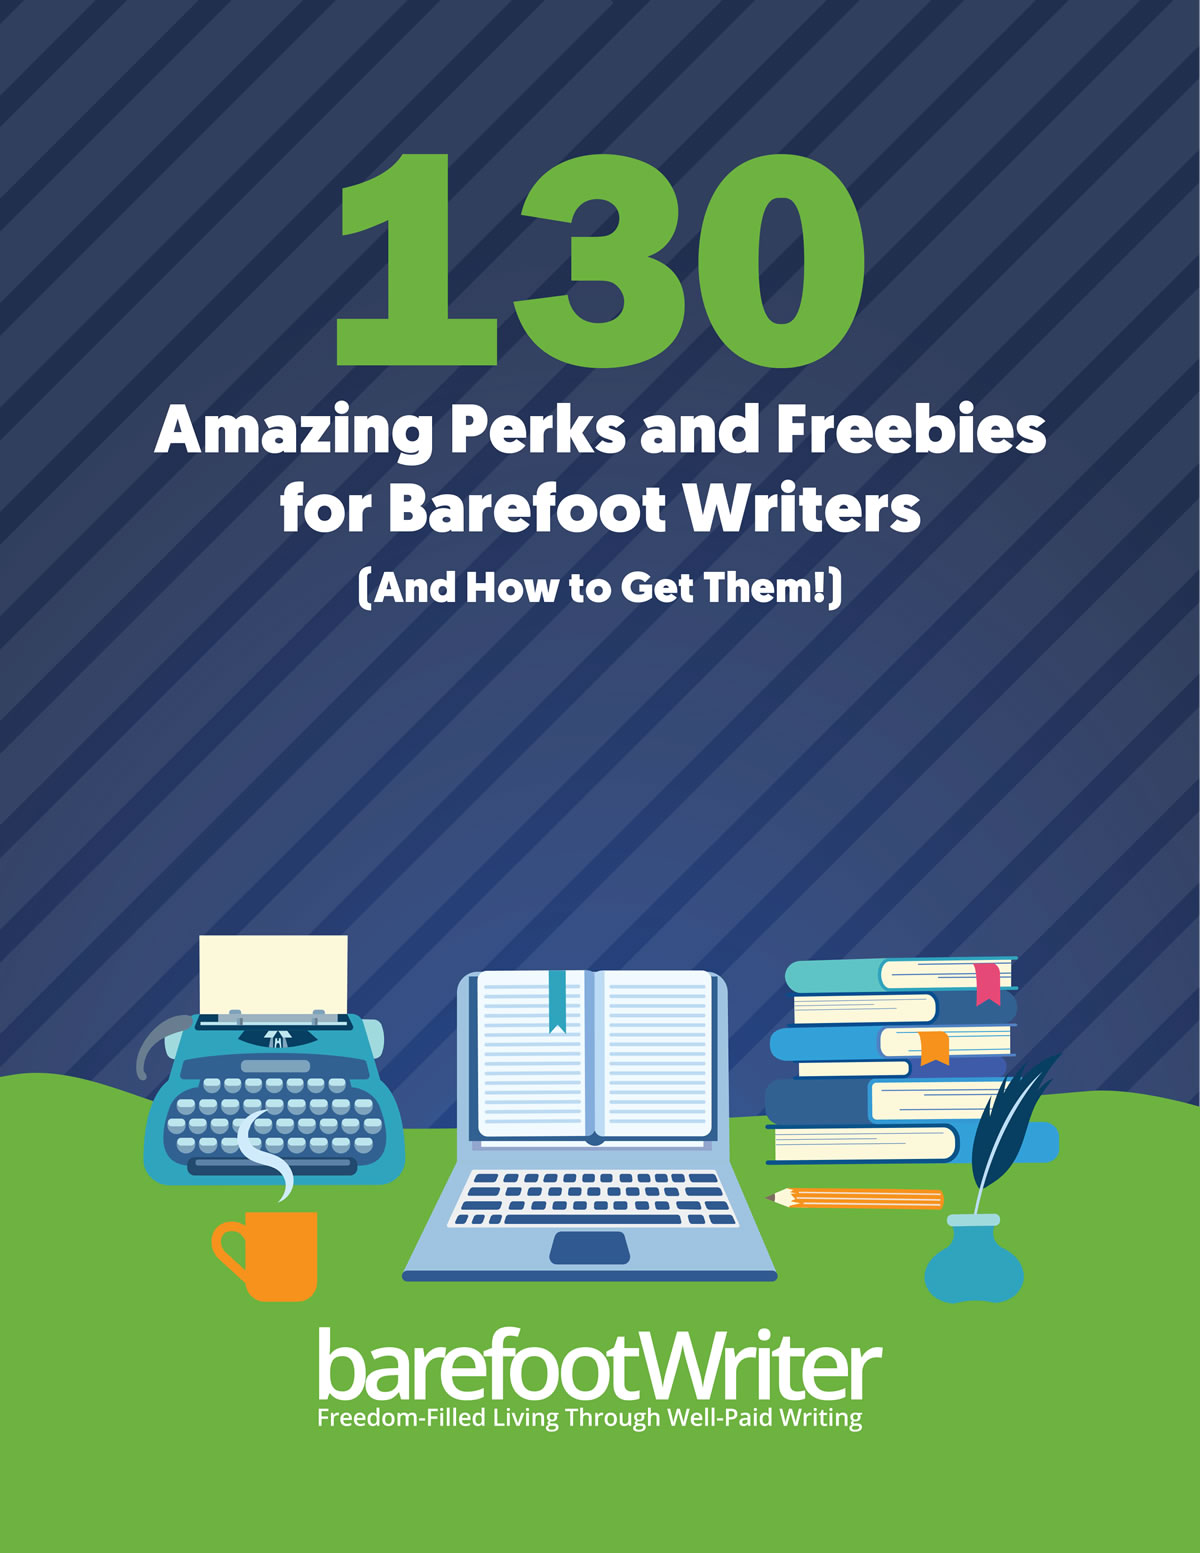 130 Amazing Perks And Freebies For Barefoot Writers (And How To Get Them!)